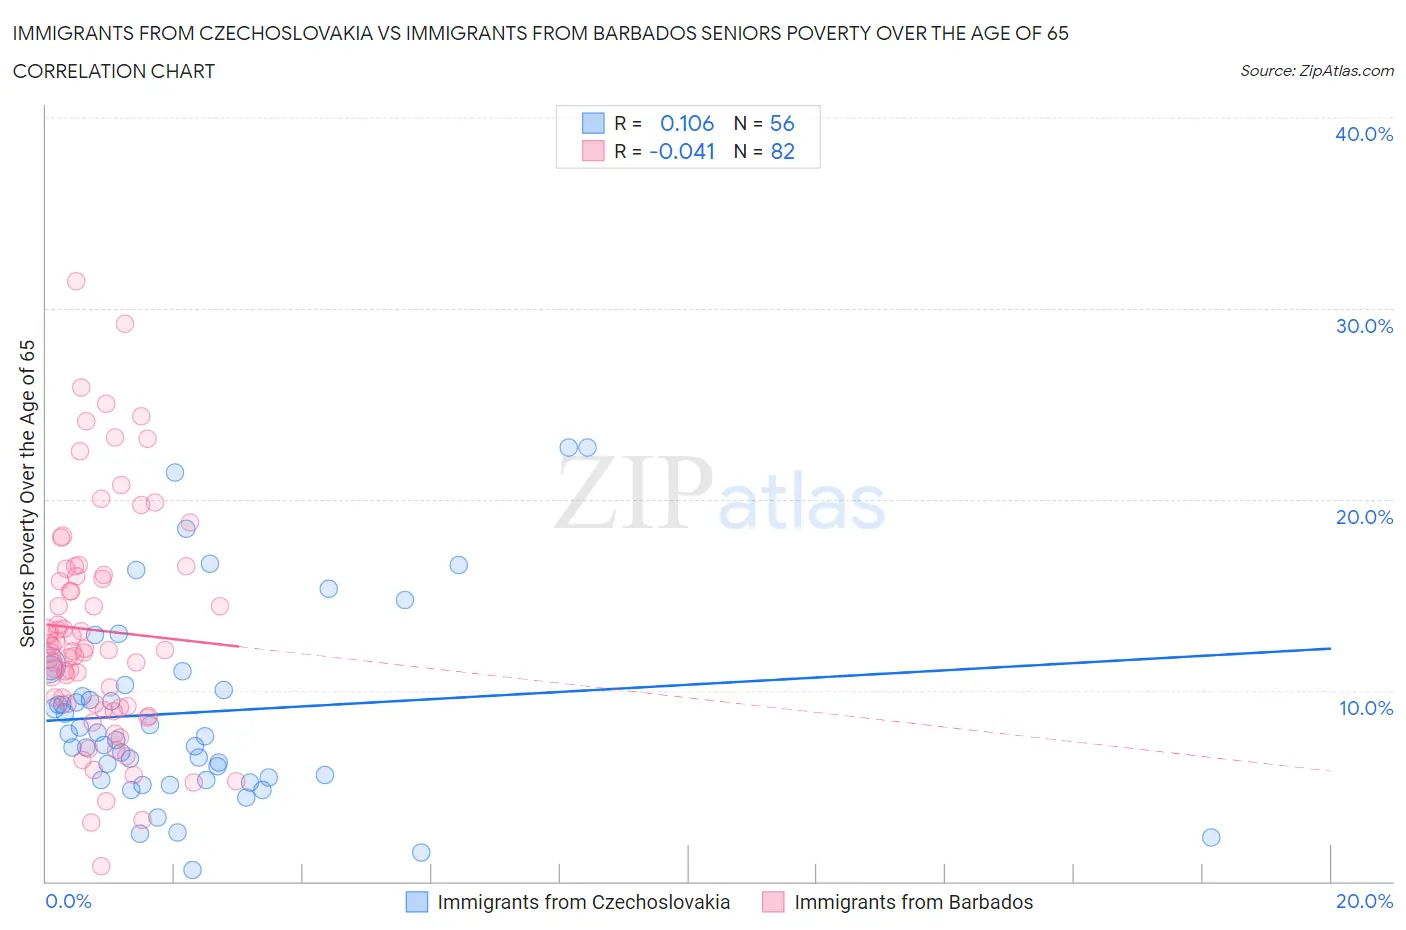 Immigrants from Czechoslovakia vs Immigrants from Barbados Seniors Poverty Over the Age of 65